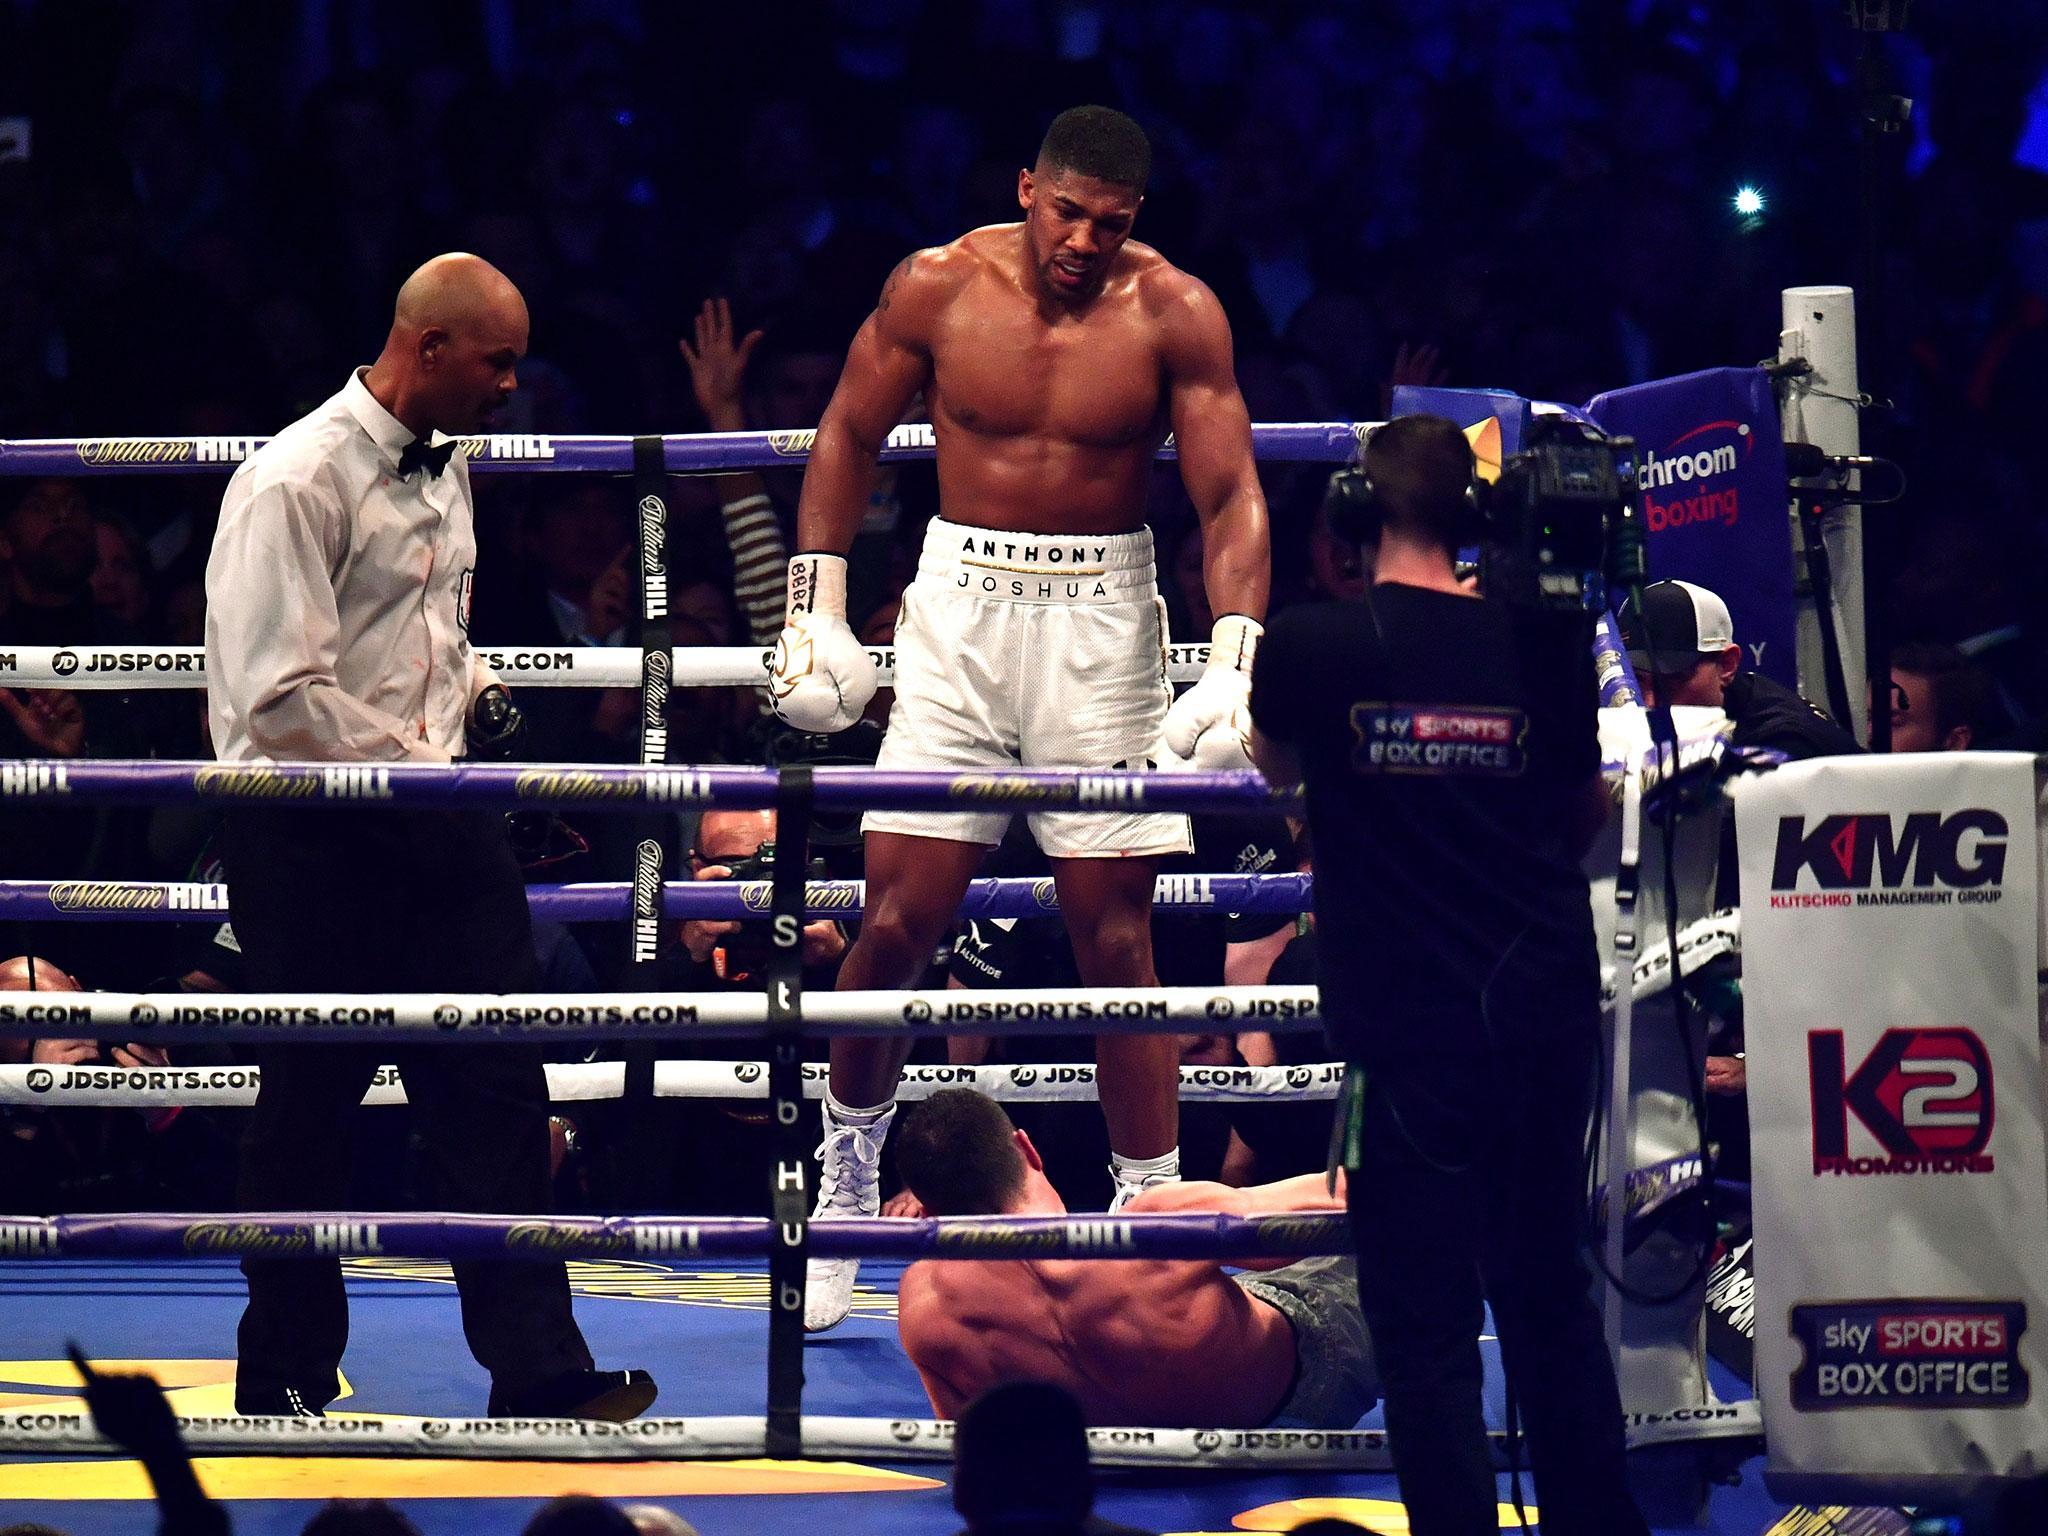 Anthony Joshua defeated Wladimir Klitschko in an absolute classic at Wembley Stadium